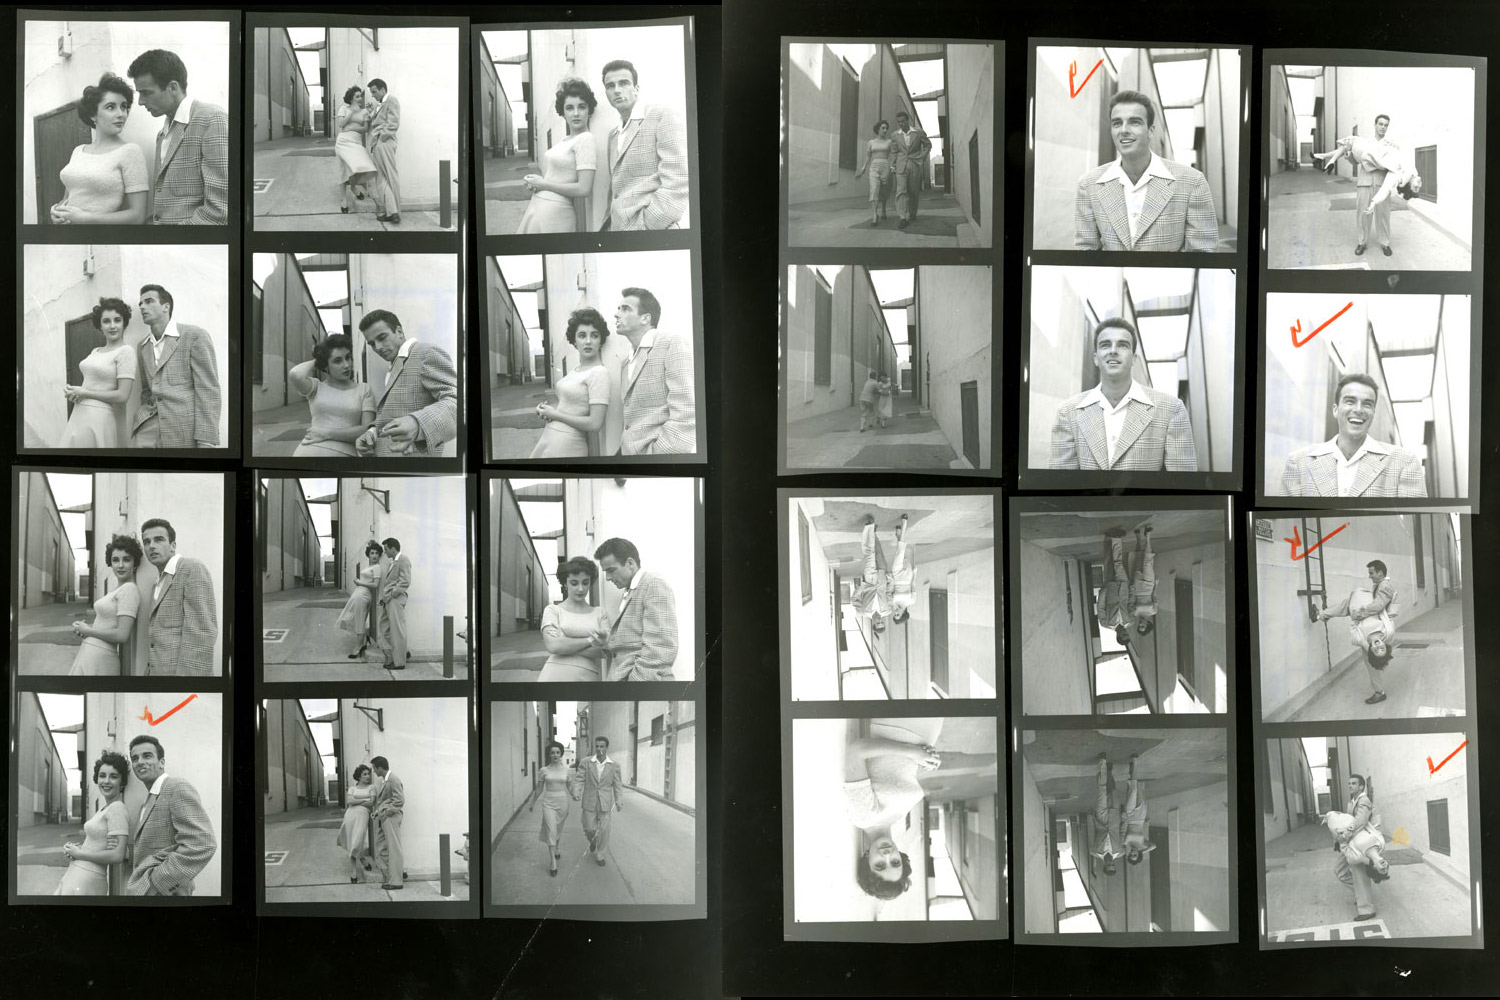 Contact sheets from LIFE photographer Peter Stackpole's shoot on a Paramount lot with Elizabeth Taylor and Montgomery Clift in 1950.